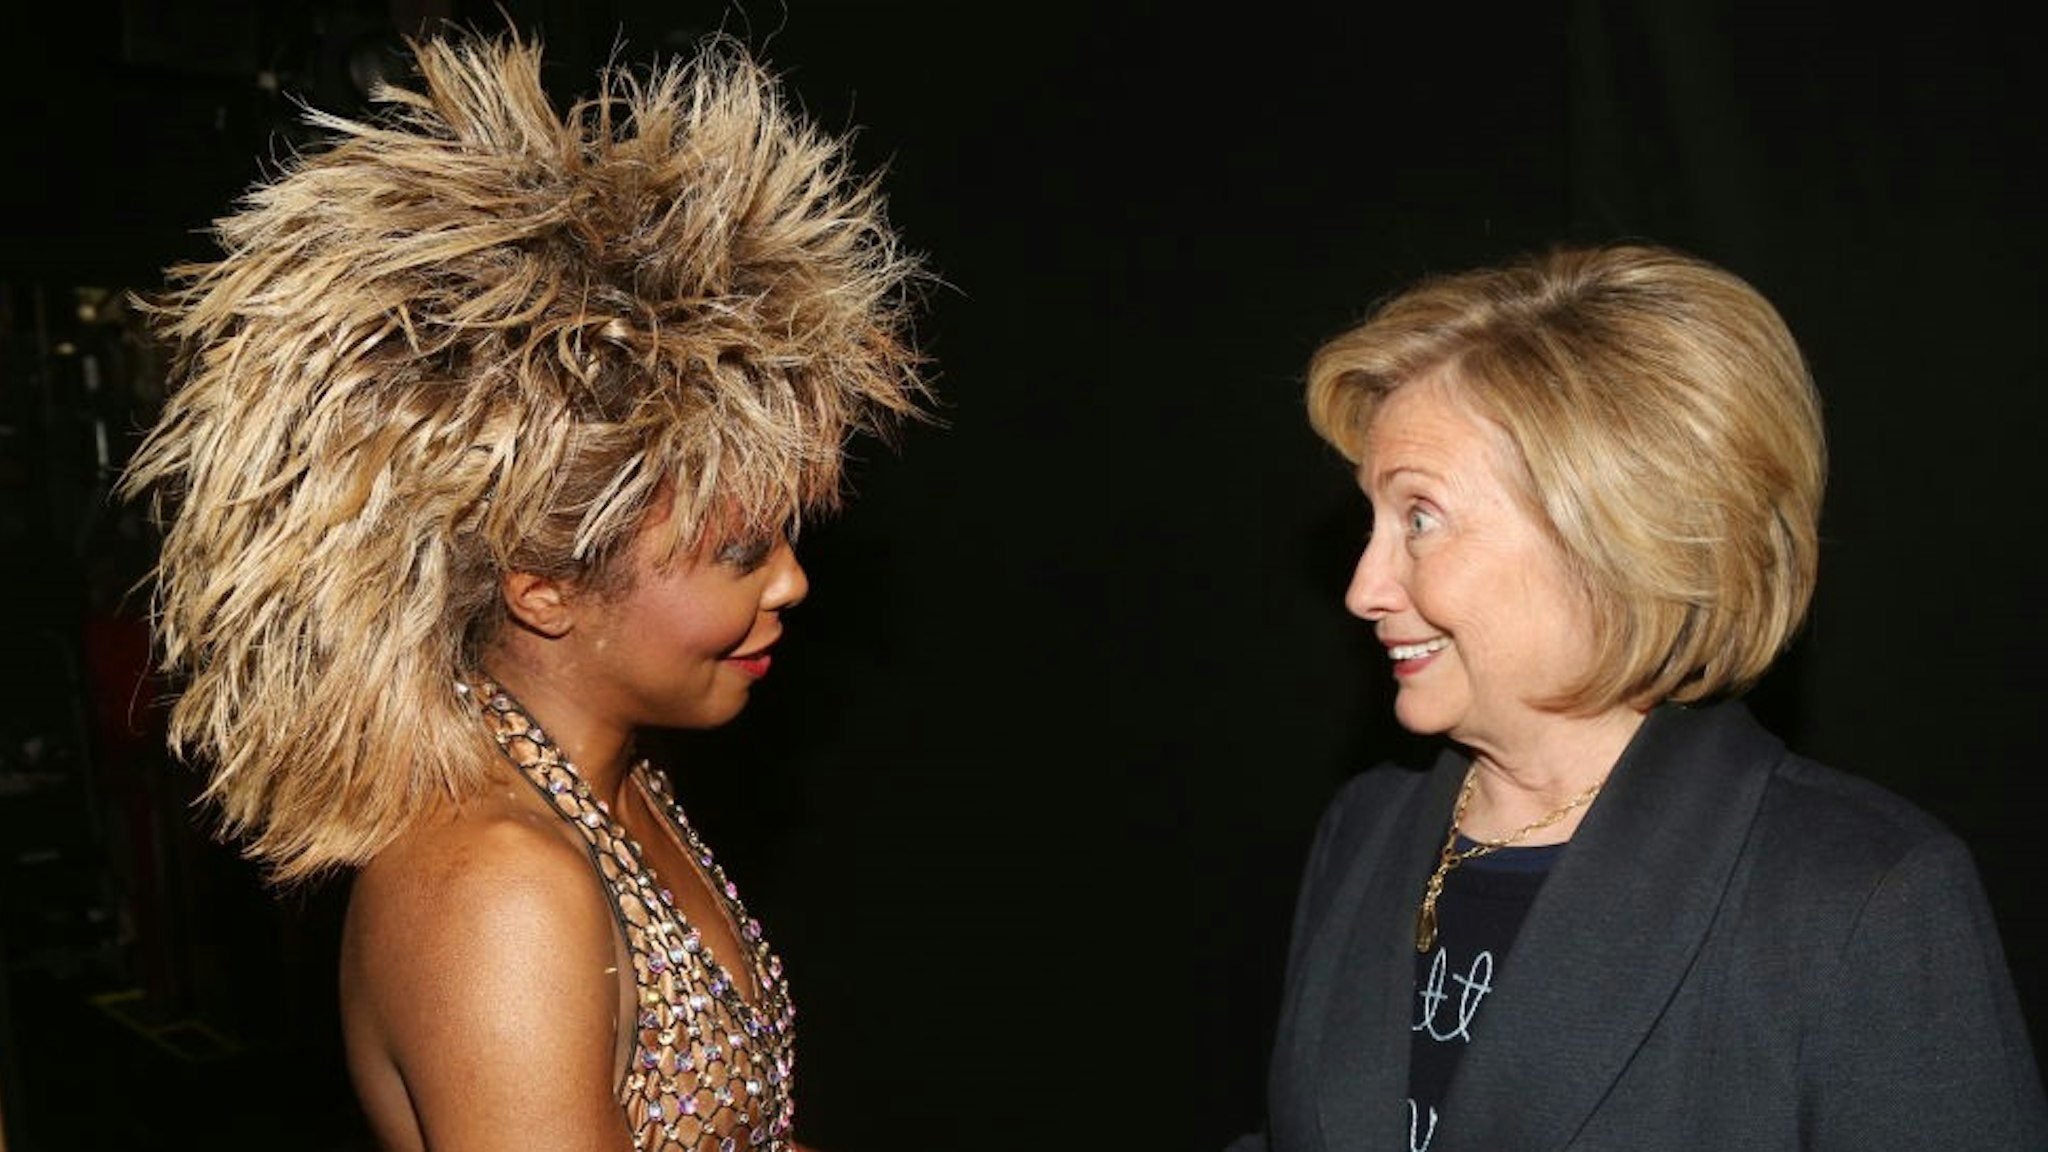 NEW YORK, NEW YORK - JANUARY 30: (EXCLUSIVE COVERAGE) Adrienne Warren as "Tina Turner" and Hillary Clinton chat backstage at the hit musical "TINA – The Tina Turner Musical" on Broadway at The Lunt Fontanne Theatre on January 30, 2020 in New York City. (Photo by